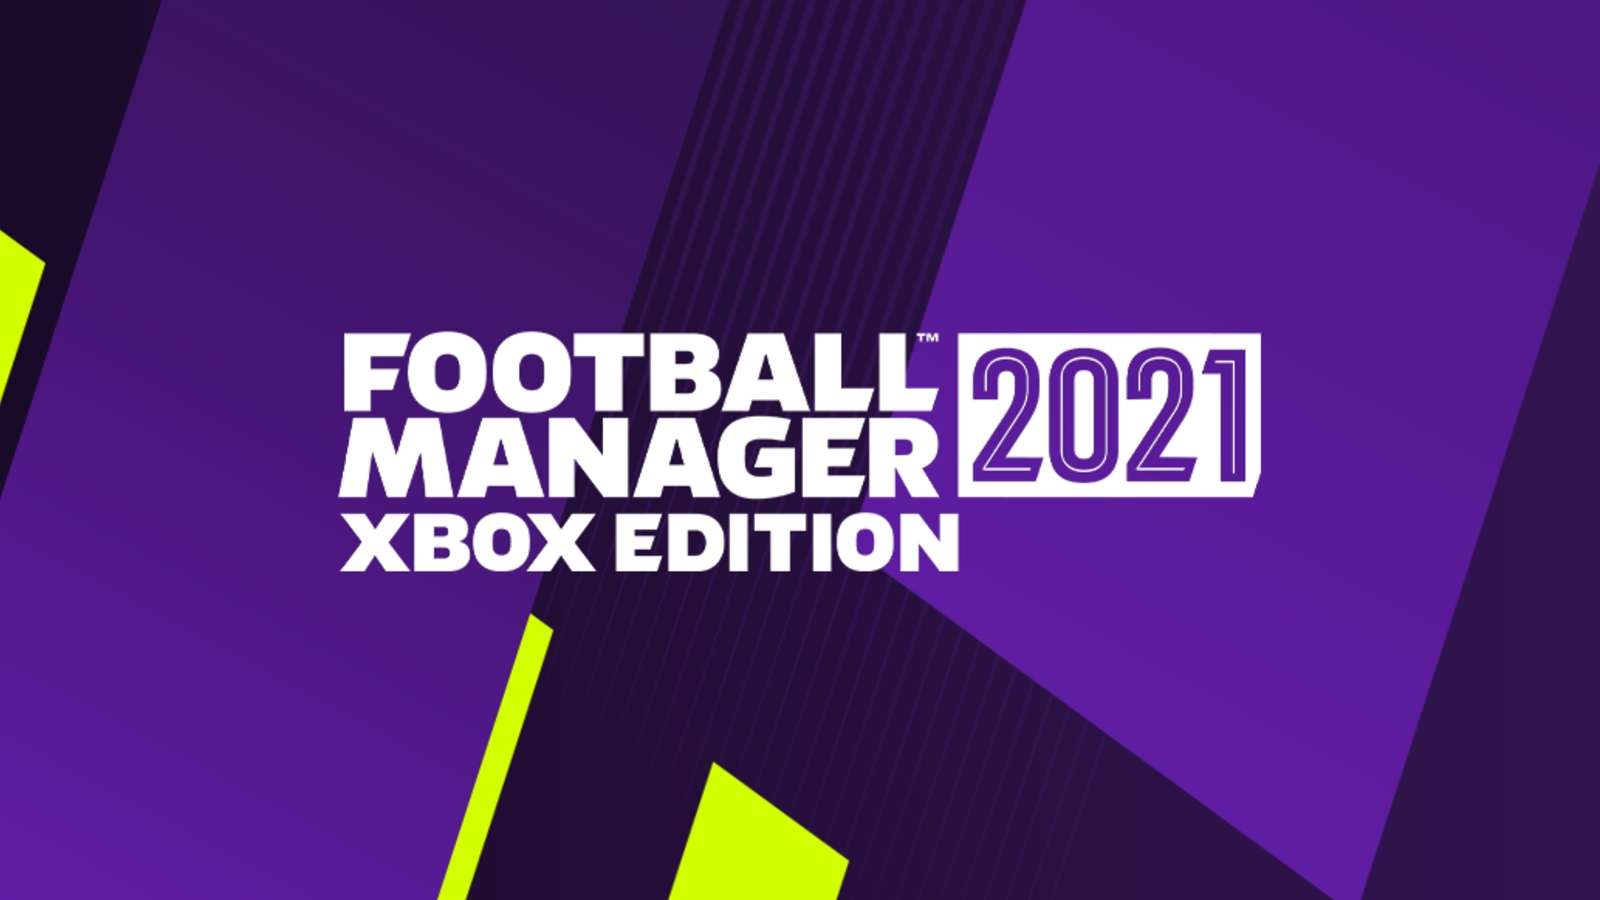 Football Manager 21 Xbox Edition release date